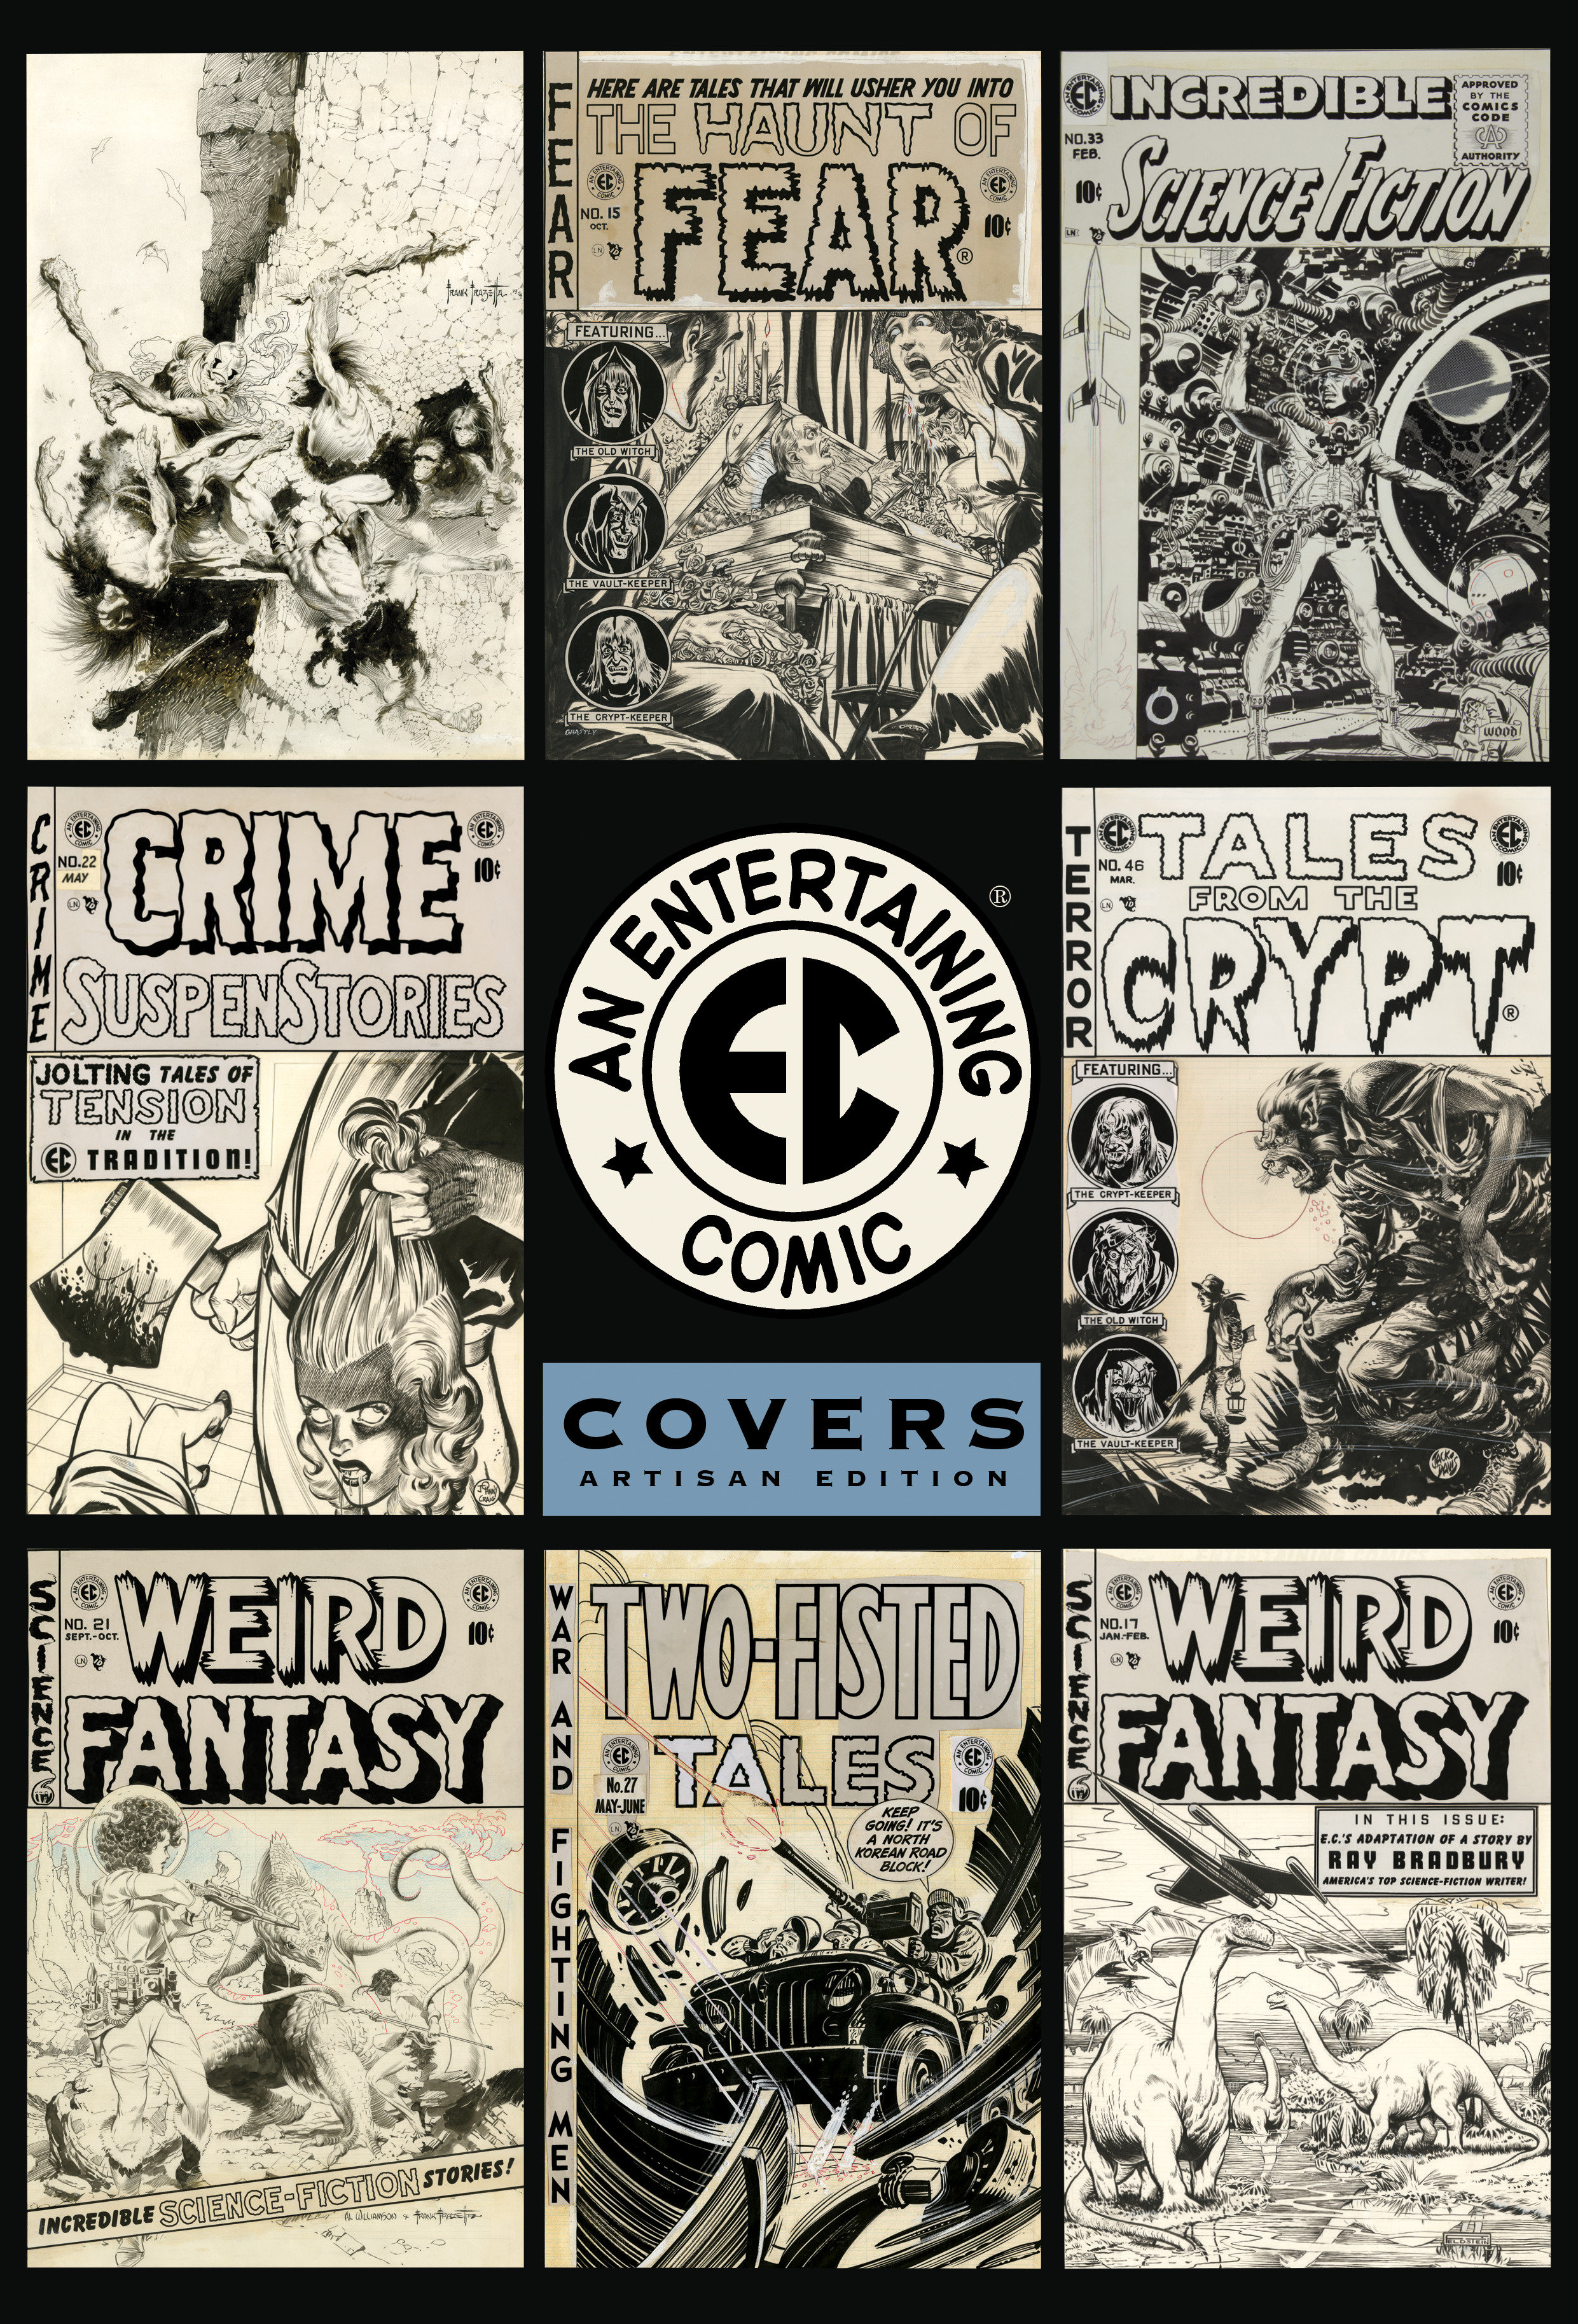 EC Covers Artisan Edition Hardcover